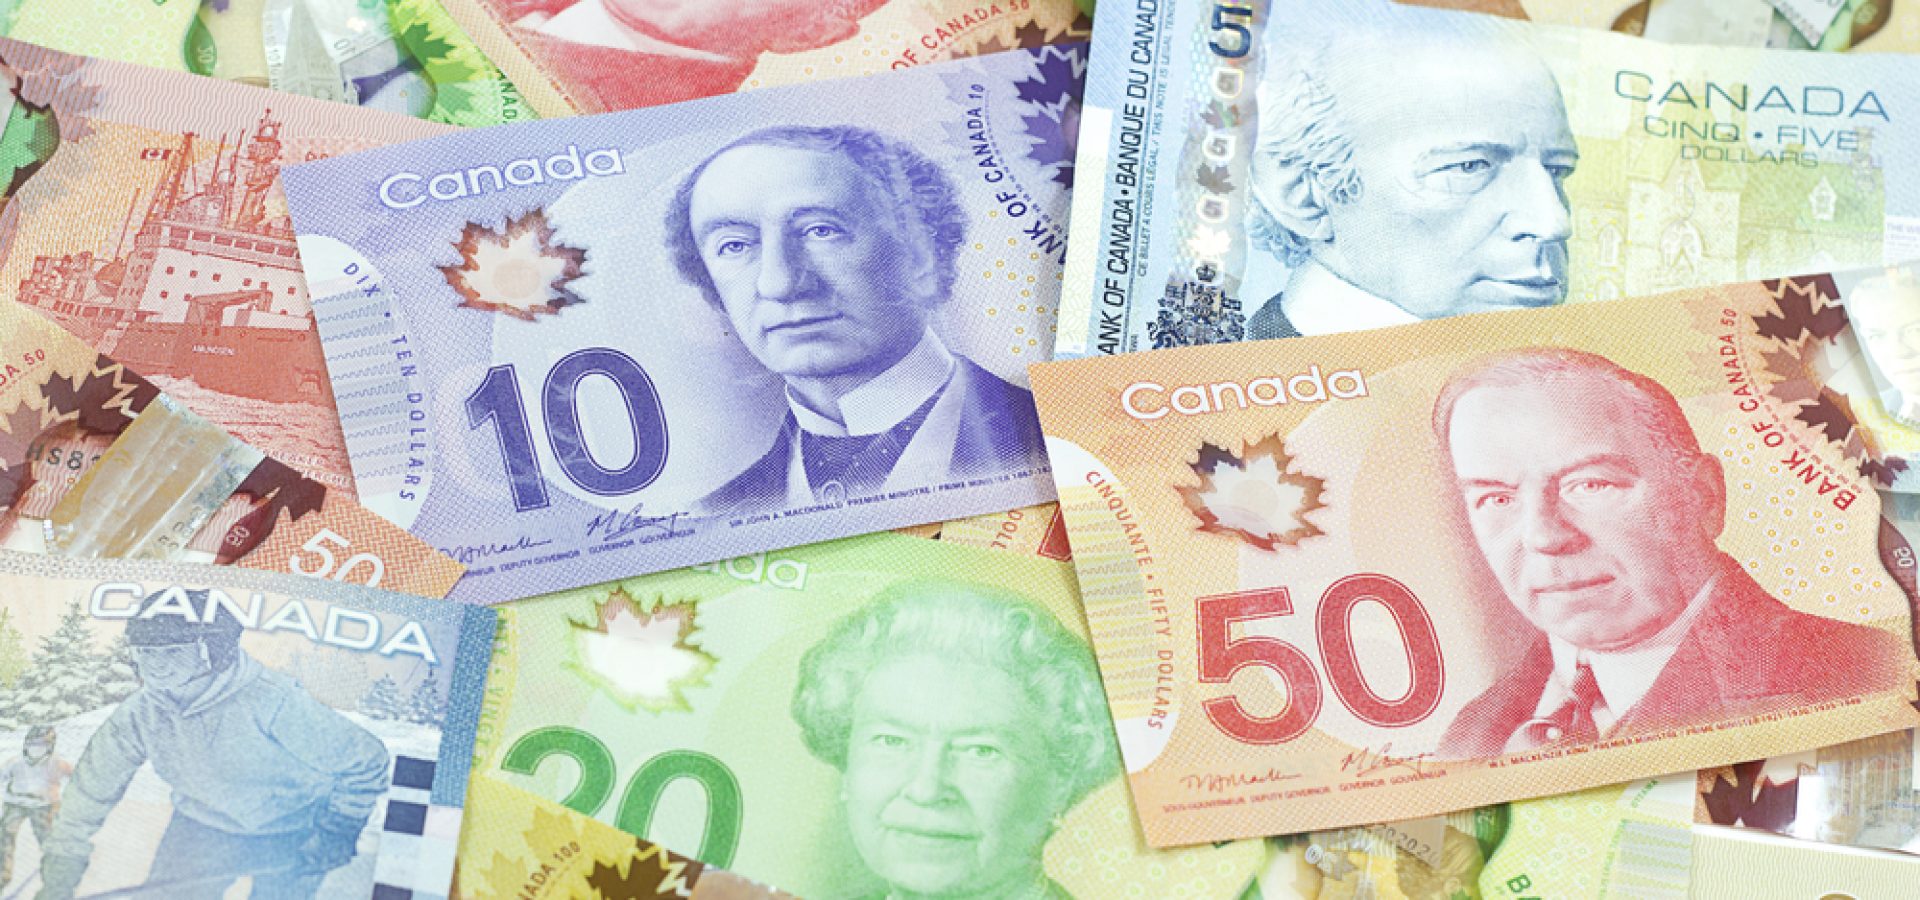 The Canadian Dollar Stable, Russia Faces Penalties